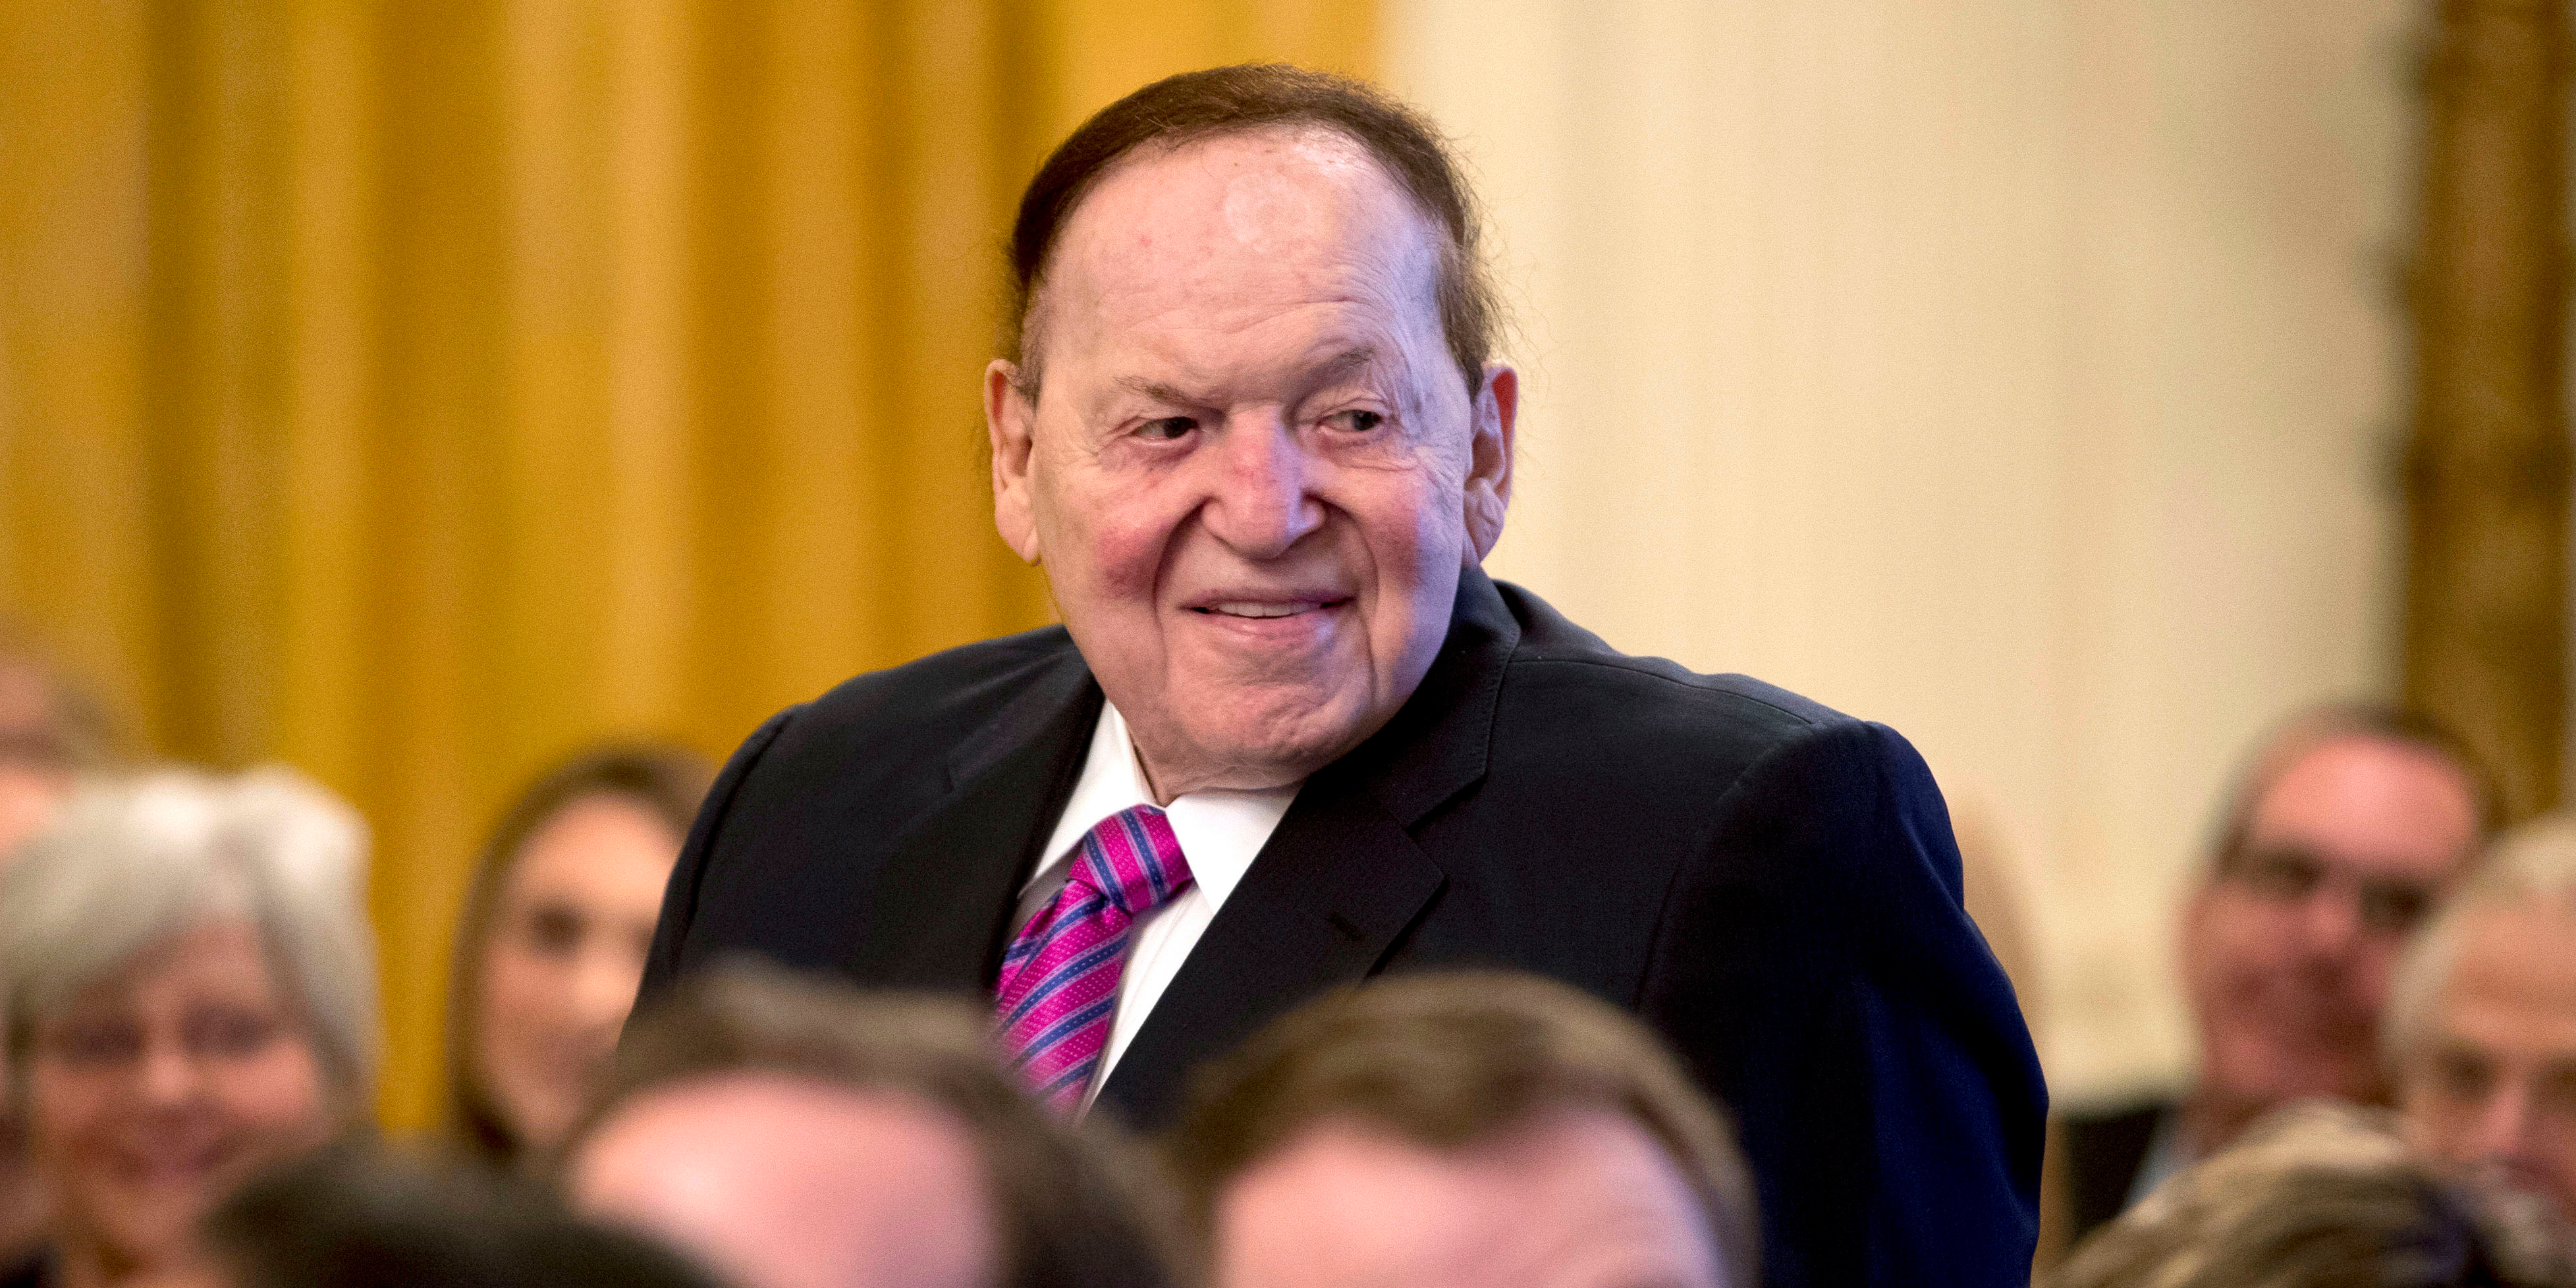 FILE - In this Nov. 16, 2018, file photo, Las Vegas Sands Corporation Chief Executive and Republican mega donor Sheldon Adelson, stands as he is recognized by President Donald Trump during a Medal of Freedom ceremony in the East Room of the White House in Washington. Casino magnate and GOP donor Adelson is not in good health and has not being at his company's offices in Las Vegas since around Christmas Day. Las Vegas Sands Corp. on Thursday, Feb. 28, 2019, did not immediately respond to a request for comment. Attorney James Jimmerson told the court the condition of the 85-year-old billionaire is dire. (AP Photo/Andrew Harnik, File)